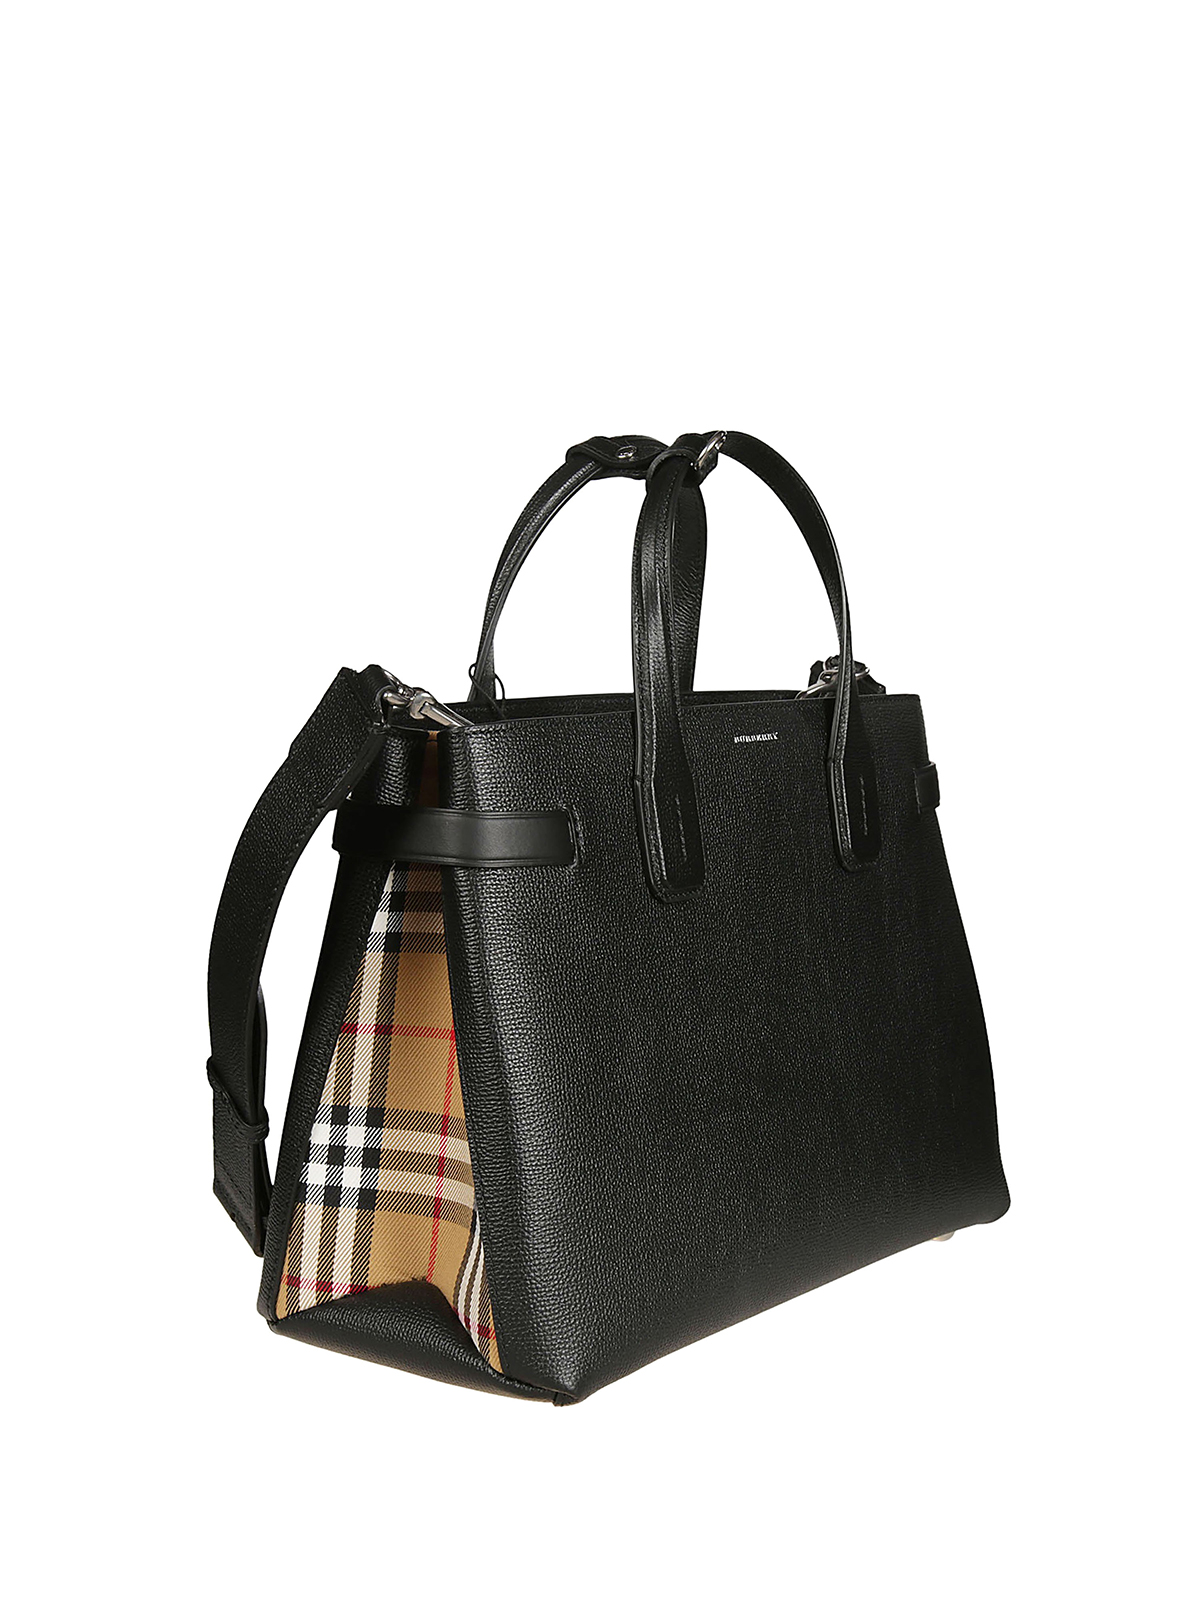 Totes bags Burberry - The Medium Banner black leather tote - 8006323